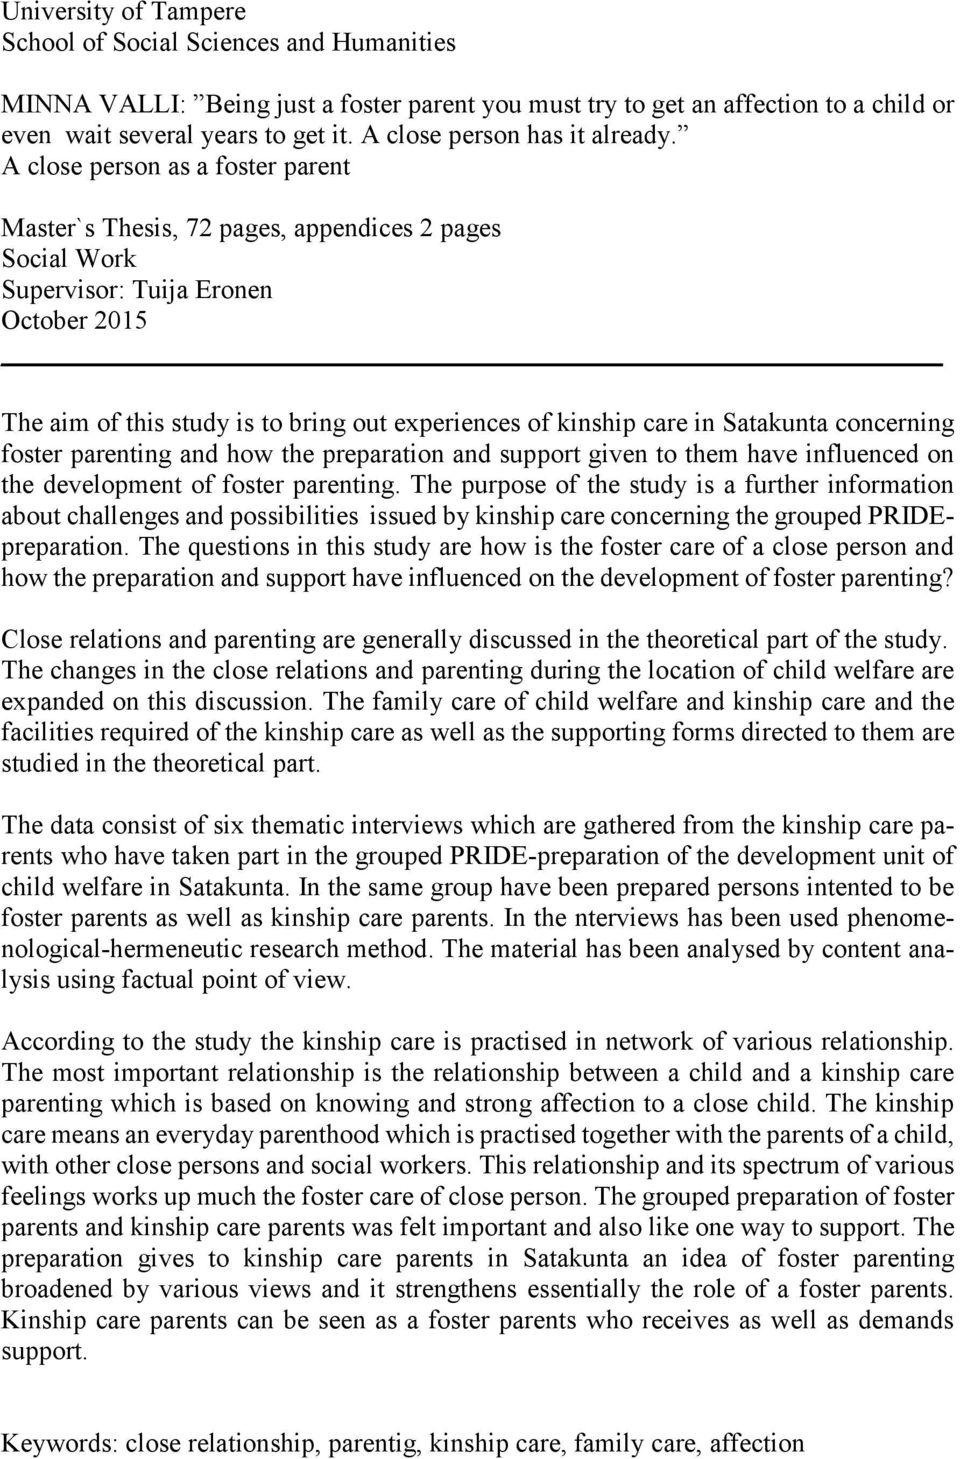 A close person as a foster parent Master`s Thesis, 72 pages, appendices 2 pages Social Work Supervisor: Tuija Eronen October 2015 The aim of this study is to bring out experiences of kinship care in